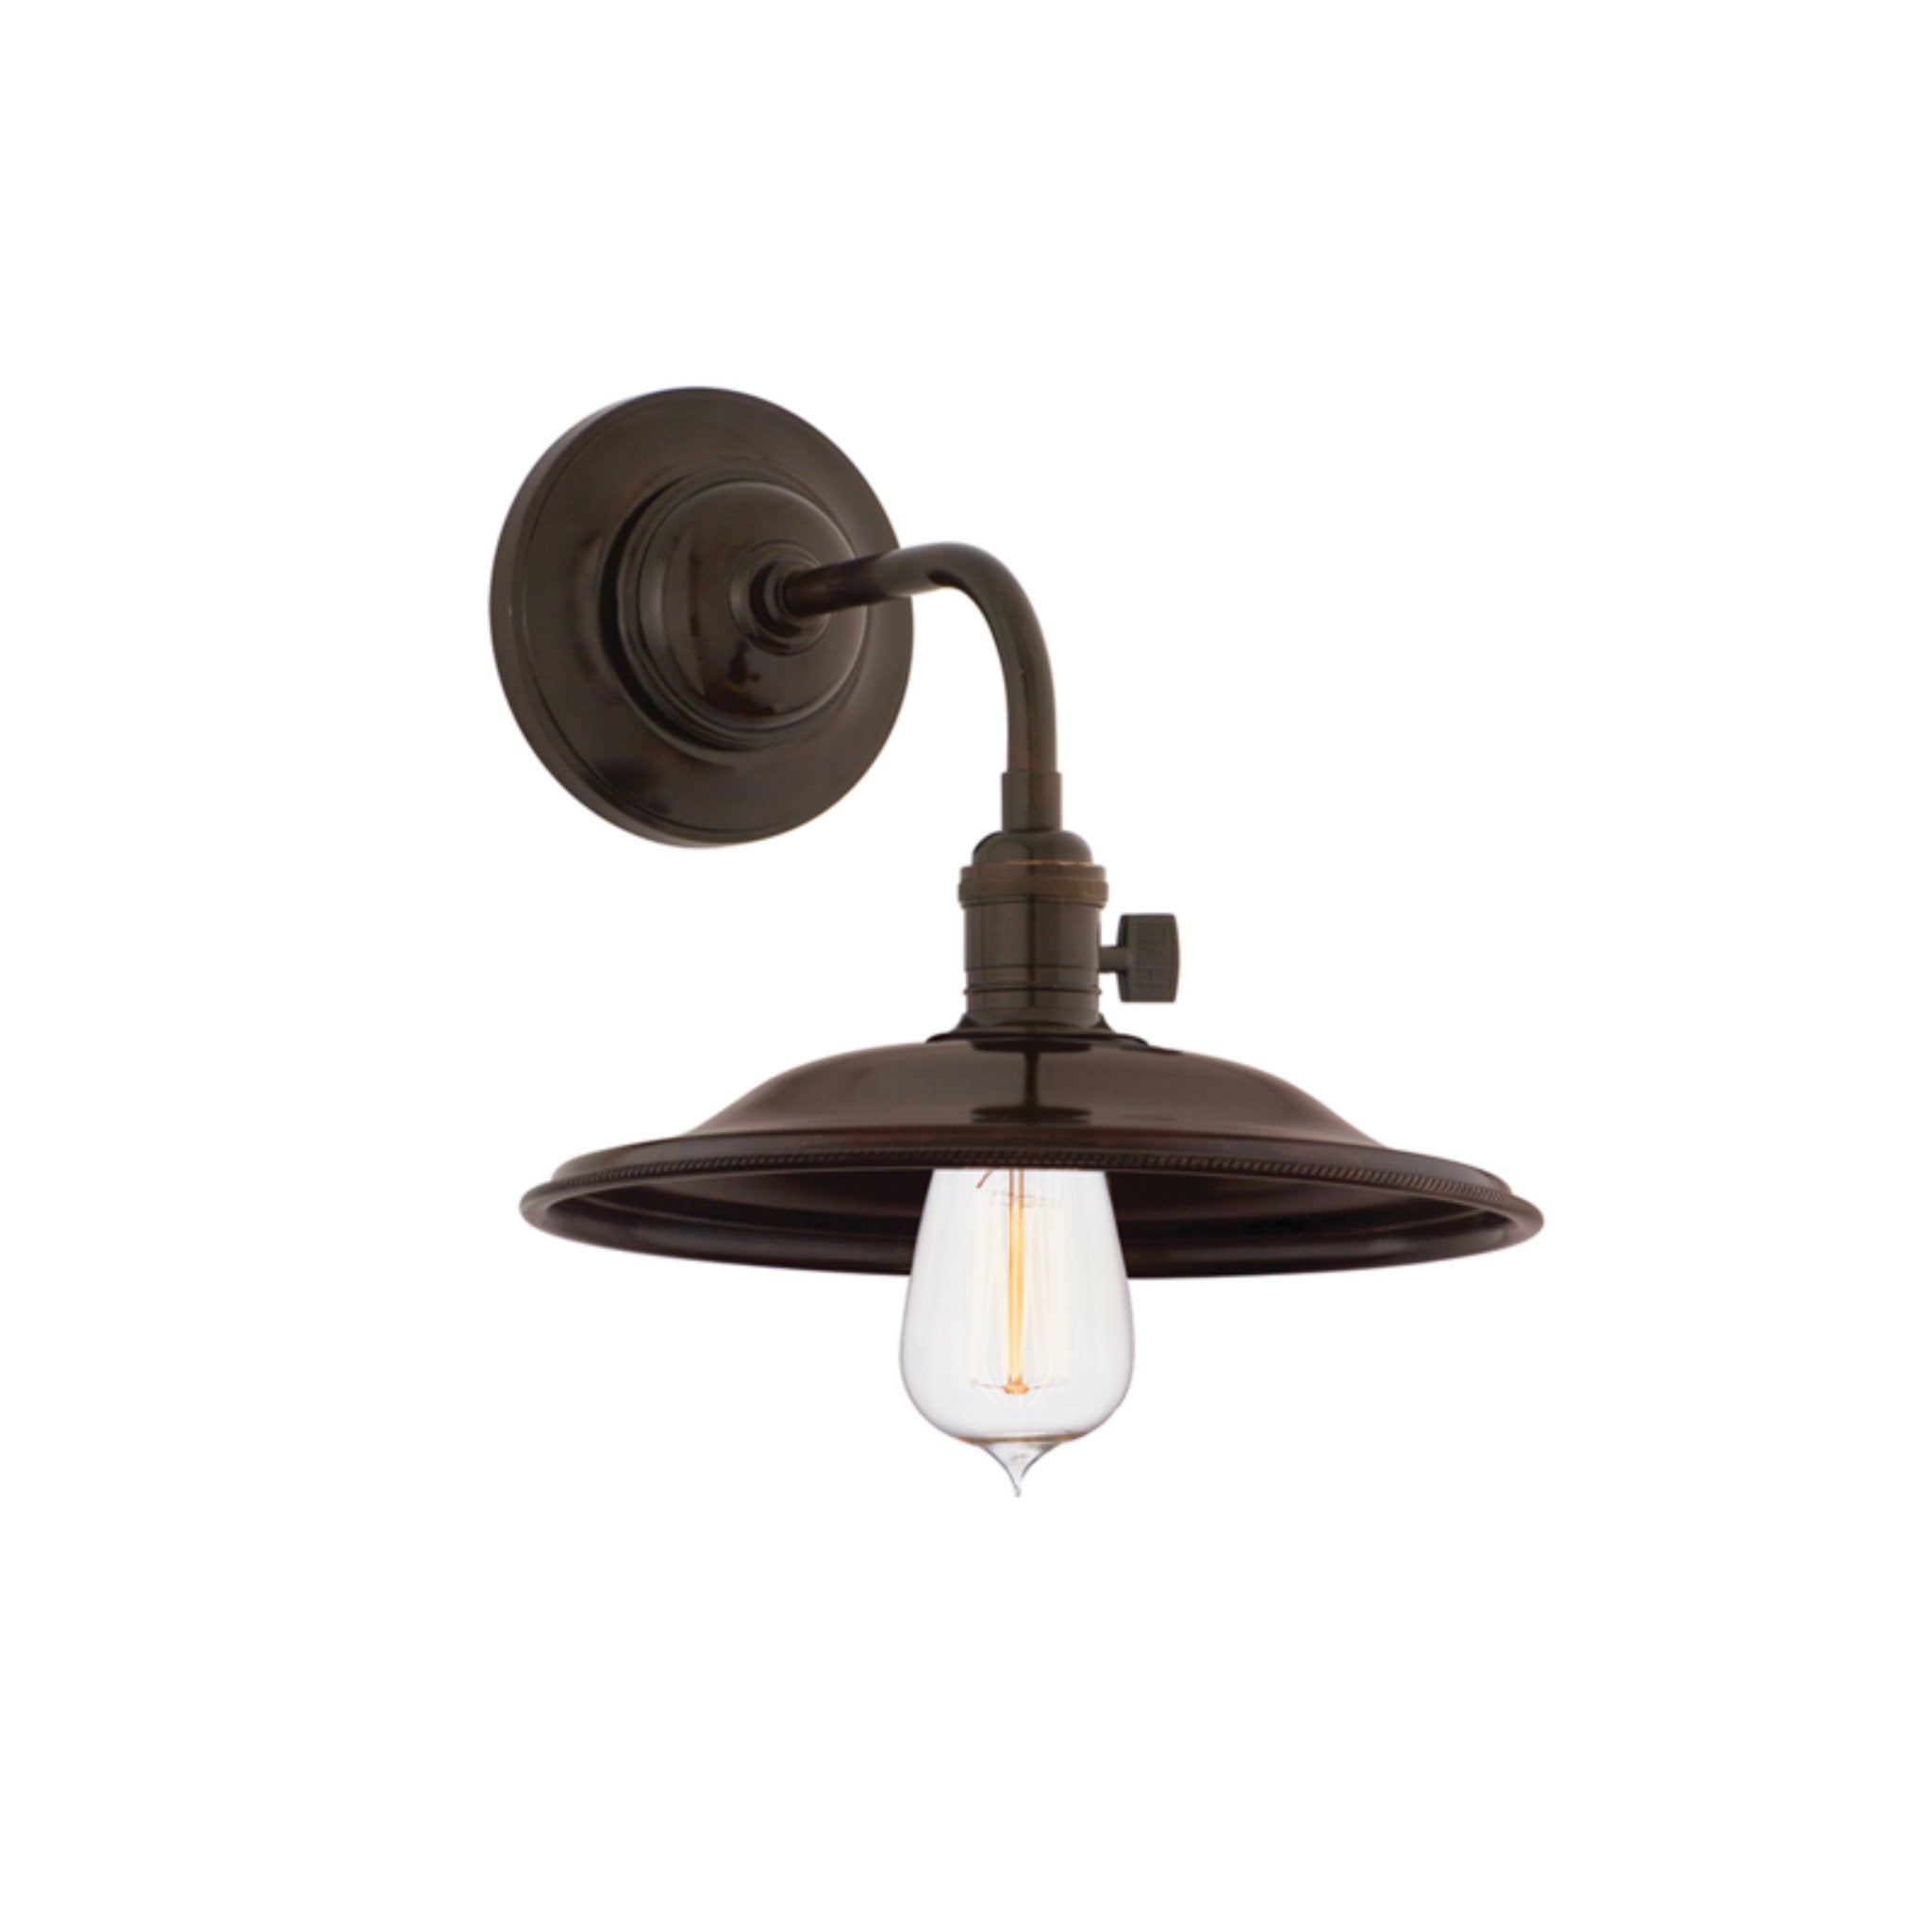 Heirloom 1 Light Wall Sconce in Old Bronze